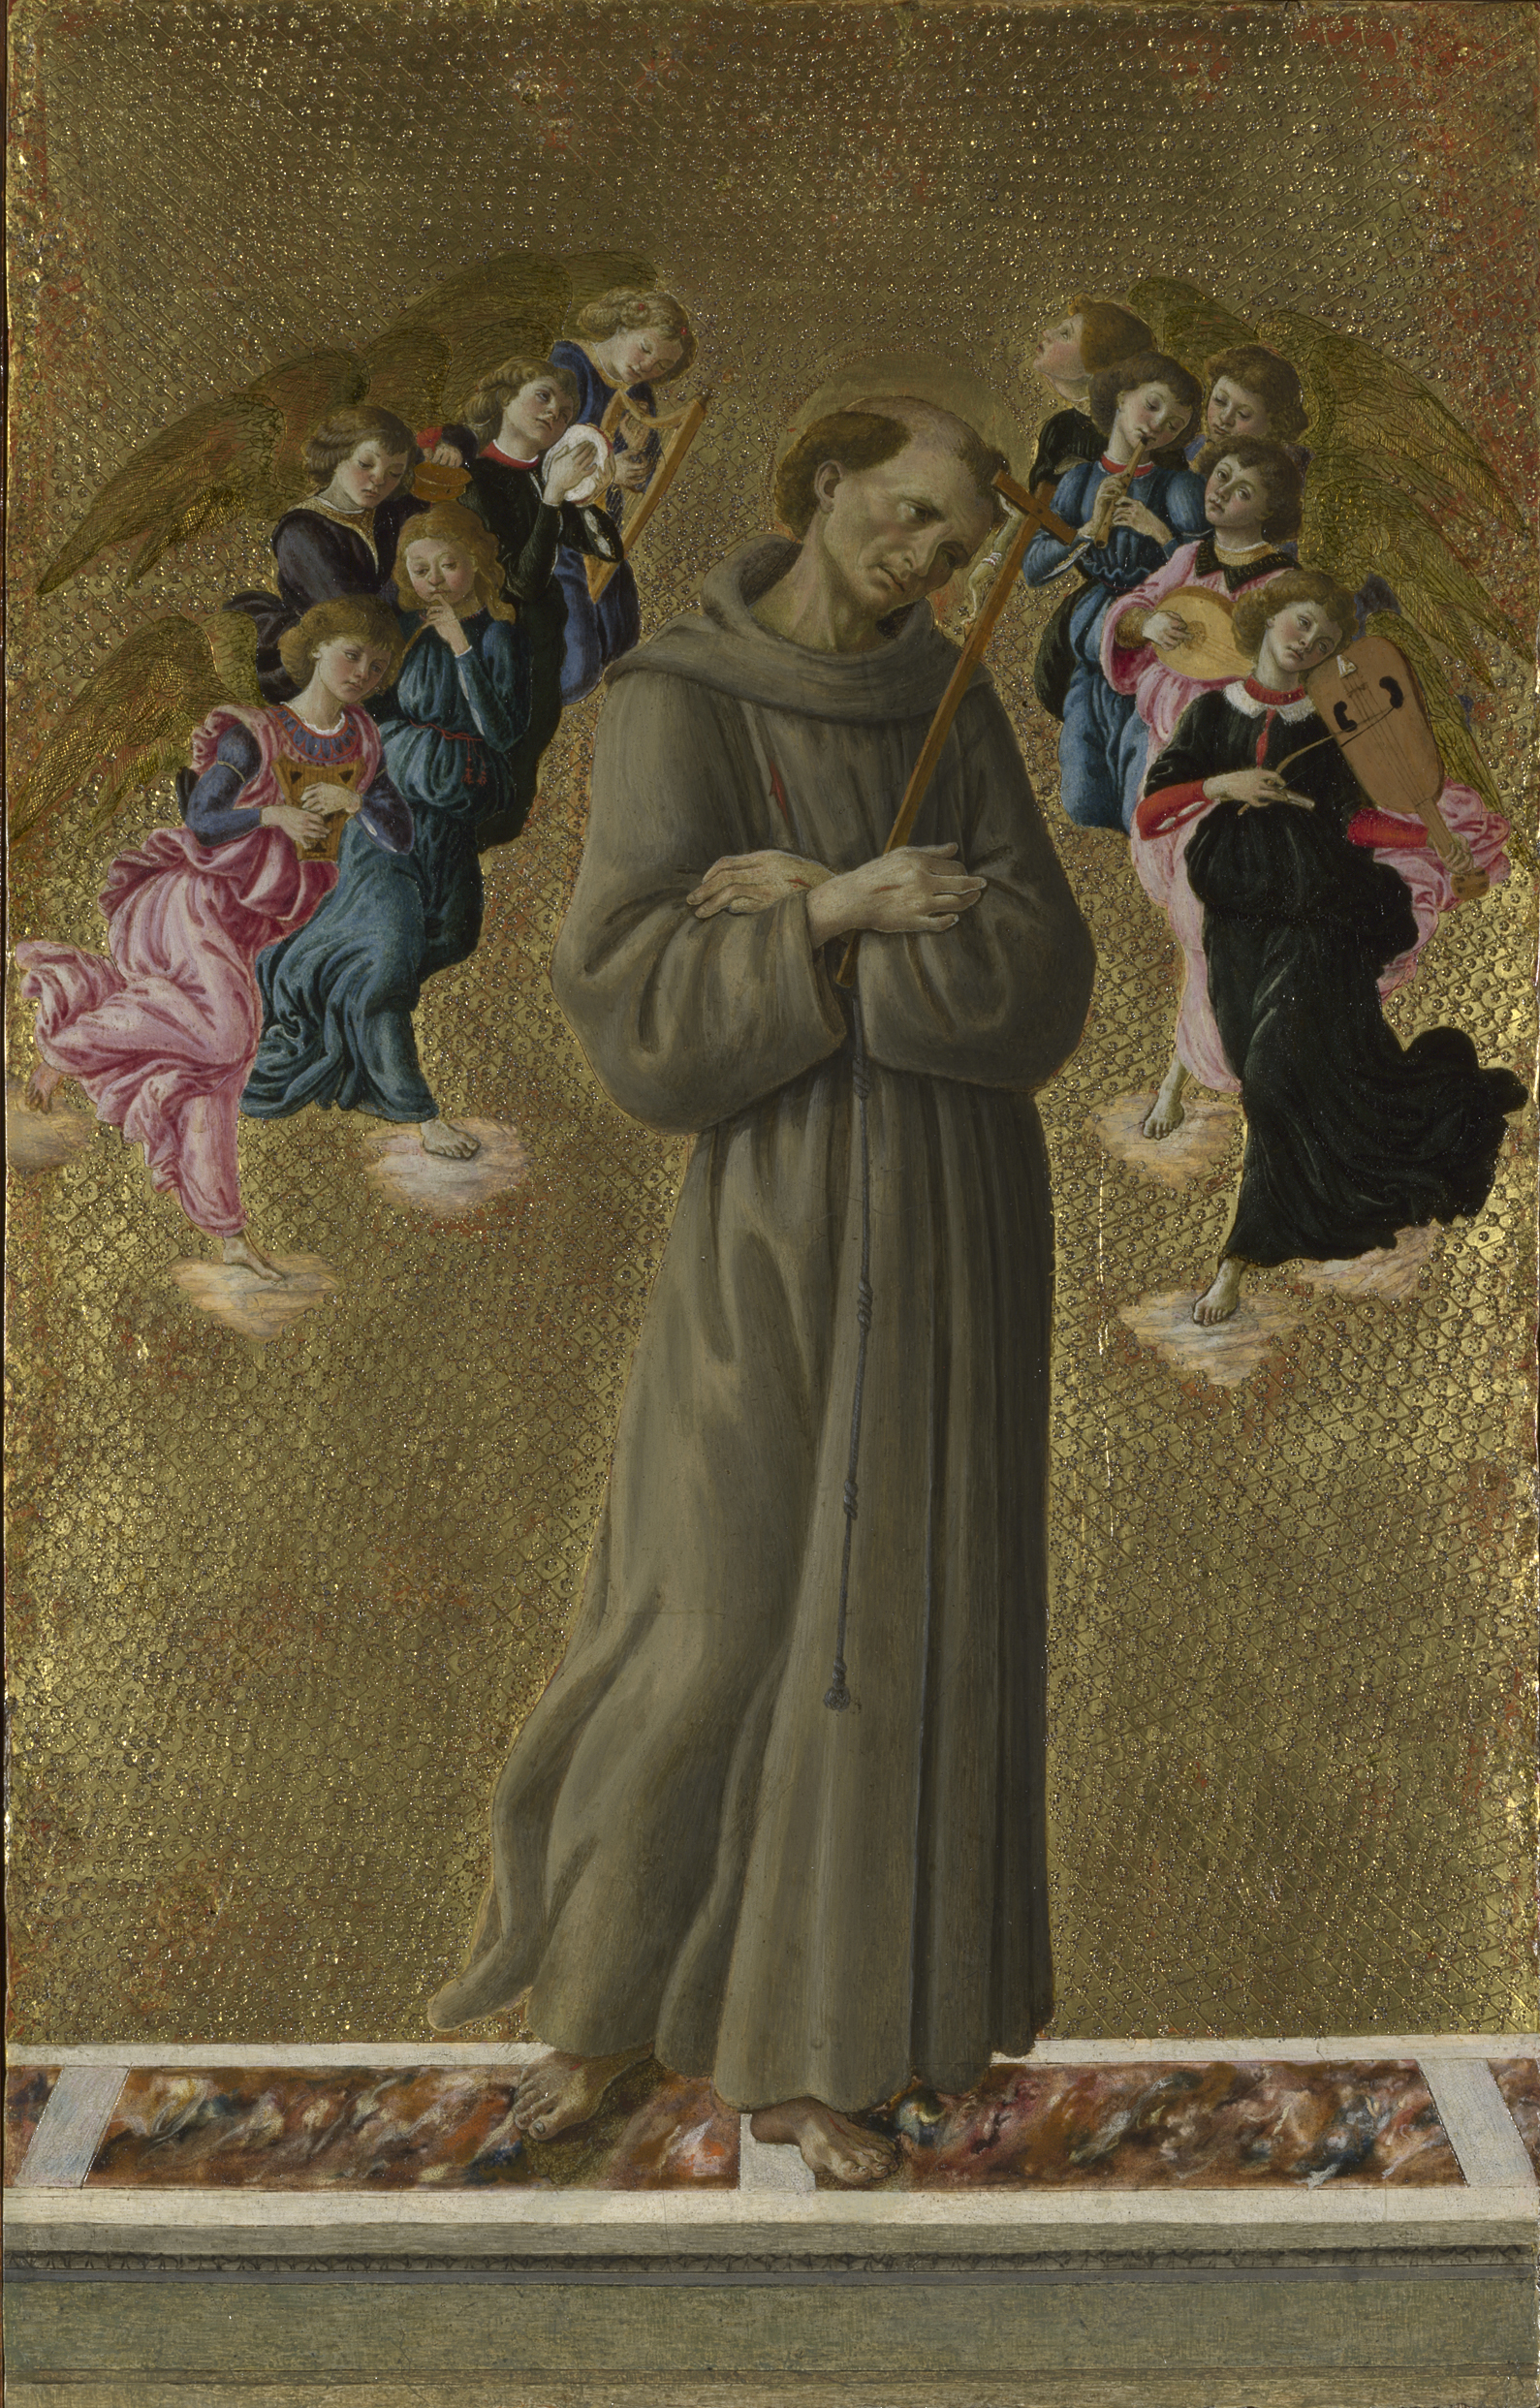 Sandro Botticelli Saint Francis of Assisi with Angels, about 1475-80, Tempera and oil on wood, 49.5 × 31.8 cm © The National Gallery, London